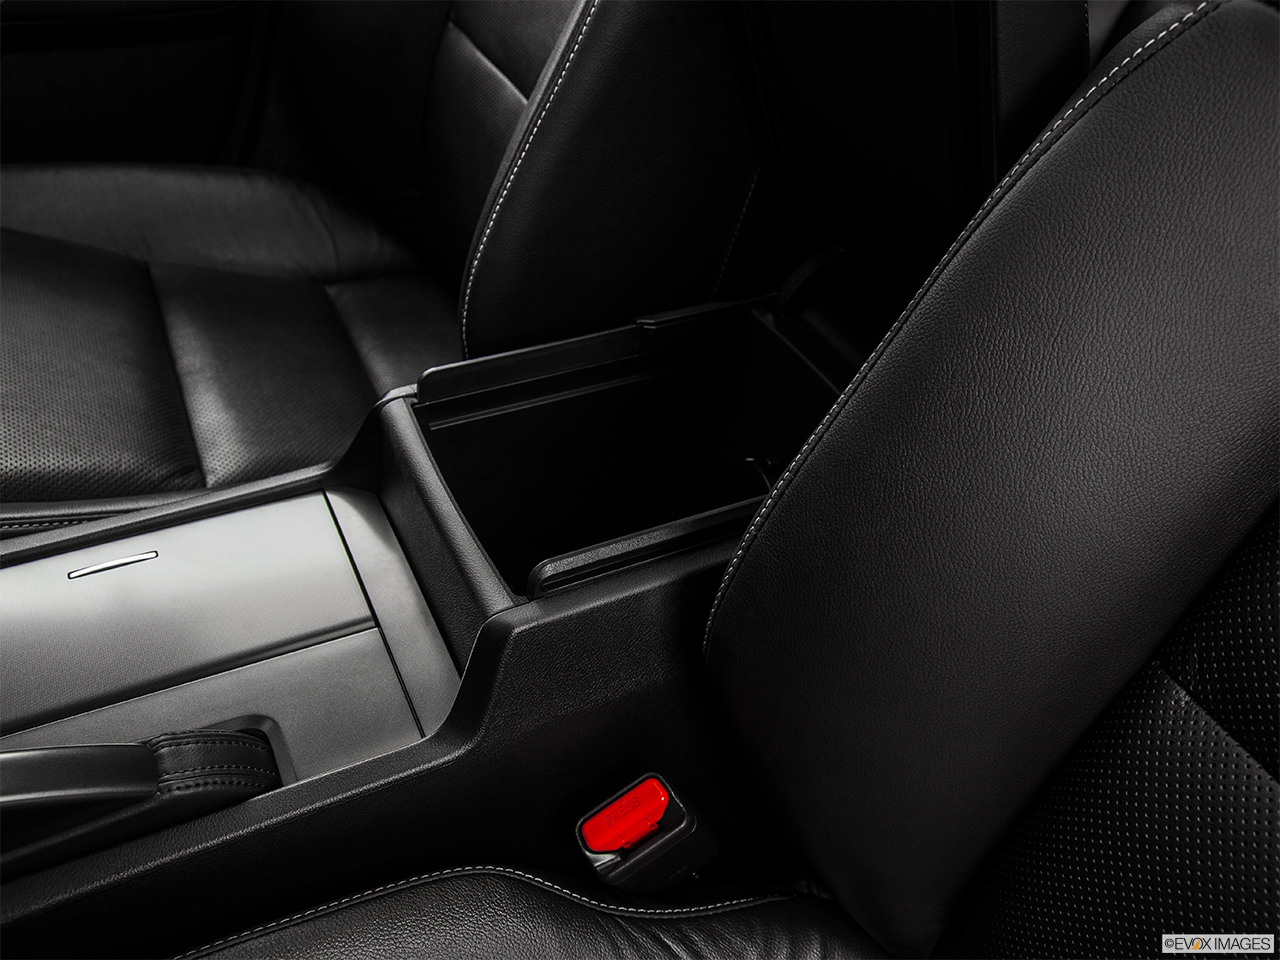 2014 Acura TSX 5-Speed Automatic Front center divider. 